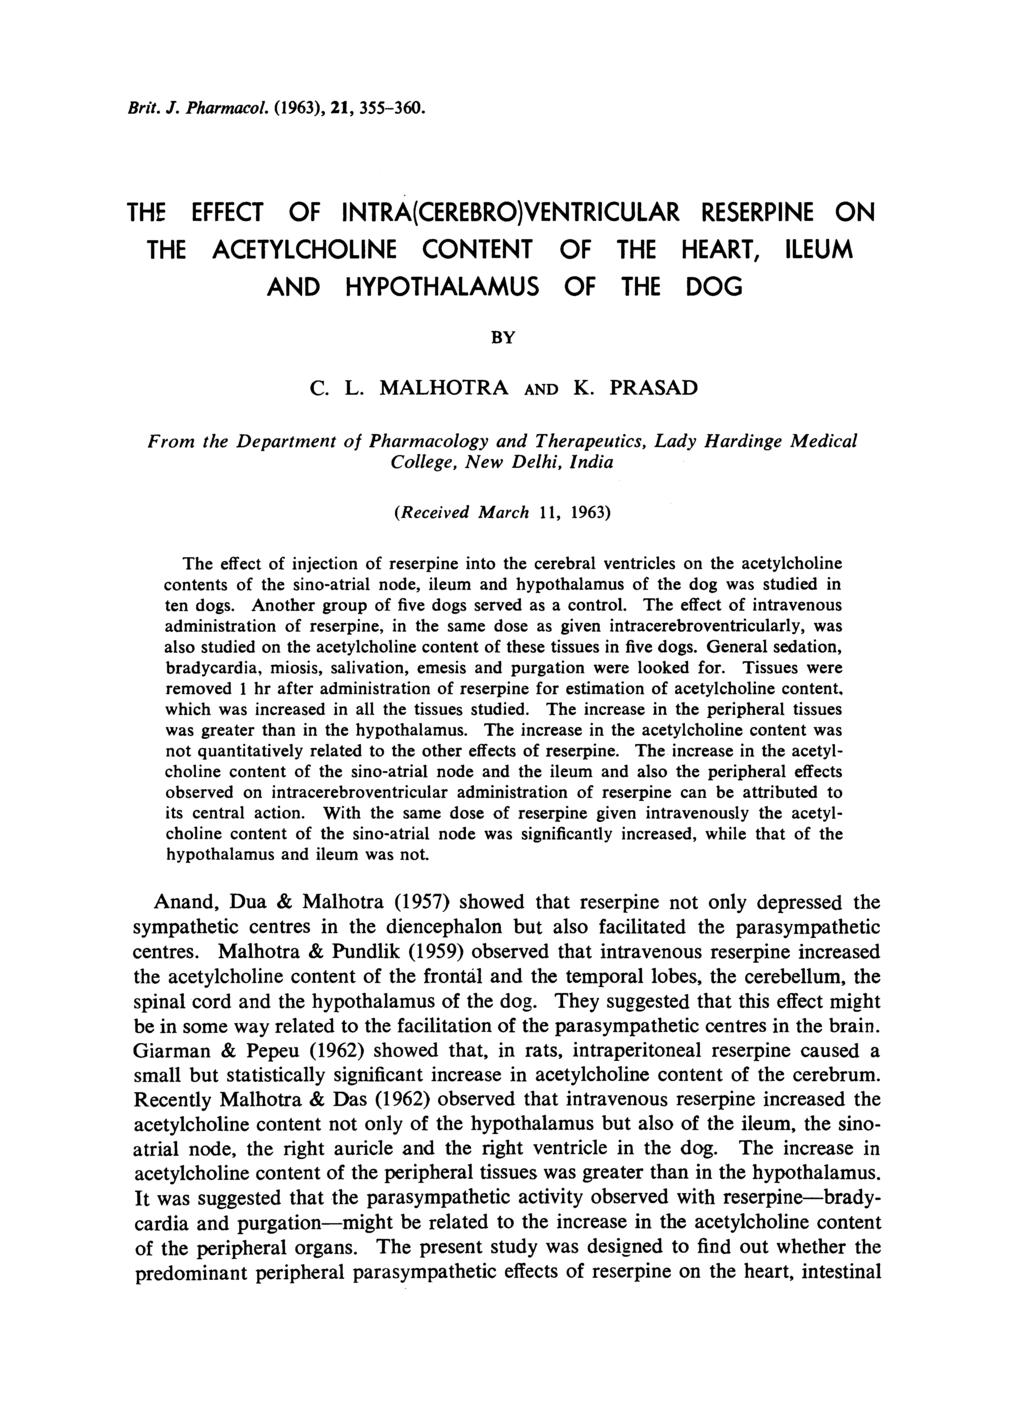 Brit. J. Pharmacol. (1963), 21, 355-360. THE EFFECT OF INTRA(CEREBRO)VENTRICULAR RESERPINE ON THE ACETYLCHOLINE CONTENT OF THE HEART, ILEUM AND HYPOTHALAMUS OF THE DOG BY C. L. MALHOTRA AND K.